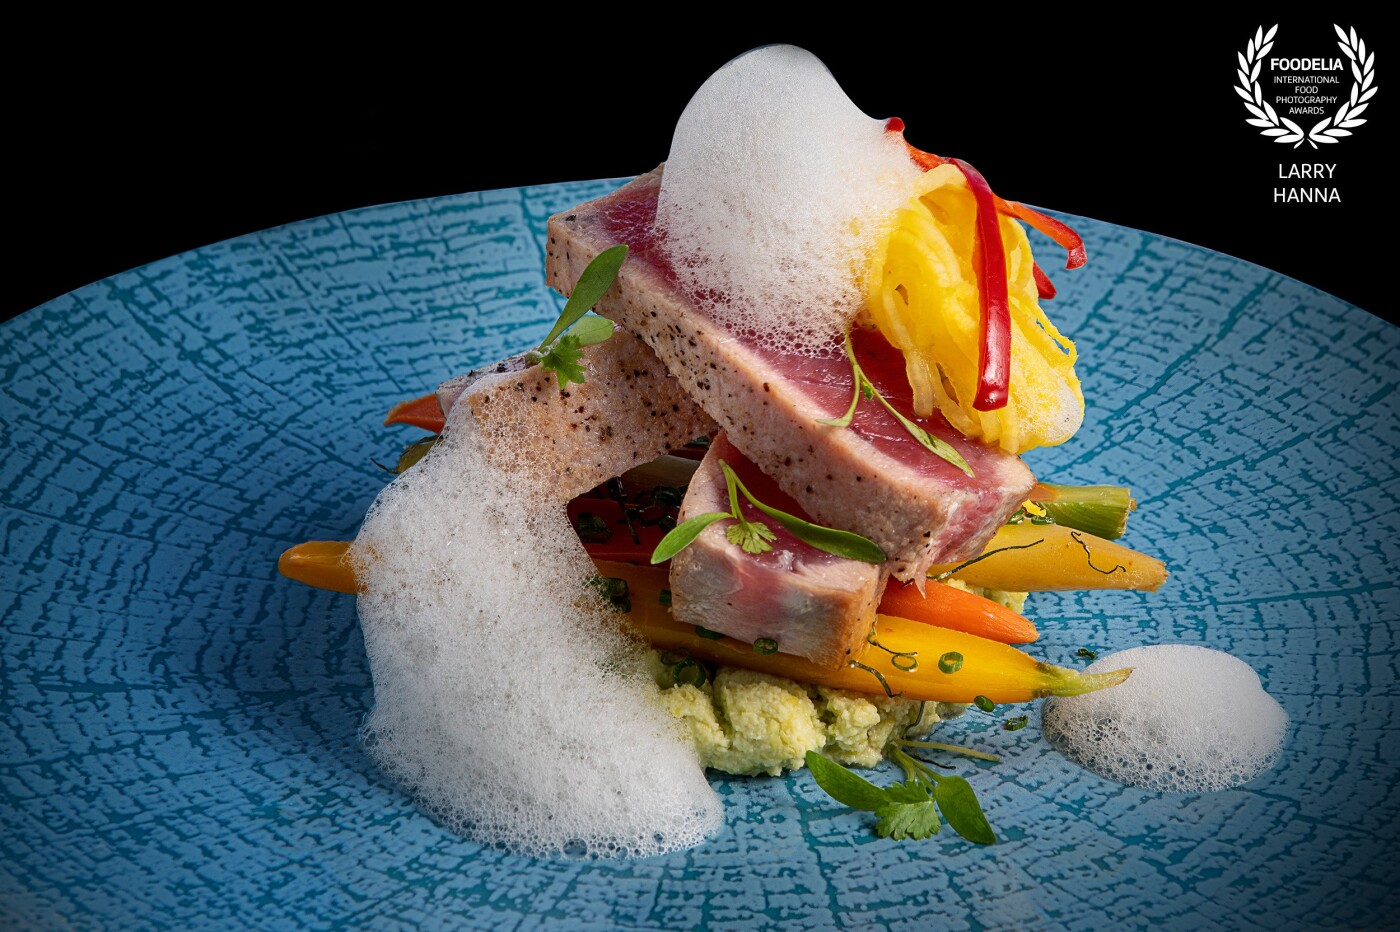 This beautiful creation was photographed for the Top of the World restaurant inside the STRAT Hotel & Casino in Las Vegas.  Their chef prepared this ahi tuna, with spaghetti squash, and  petite veggies and was styled by Amy Villareale.